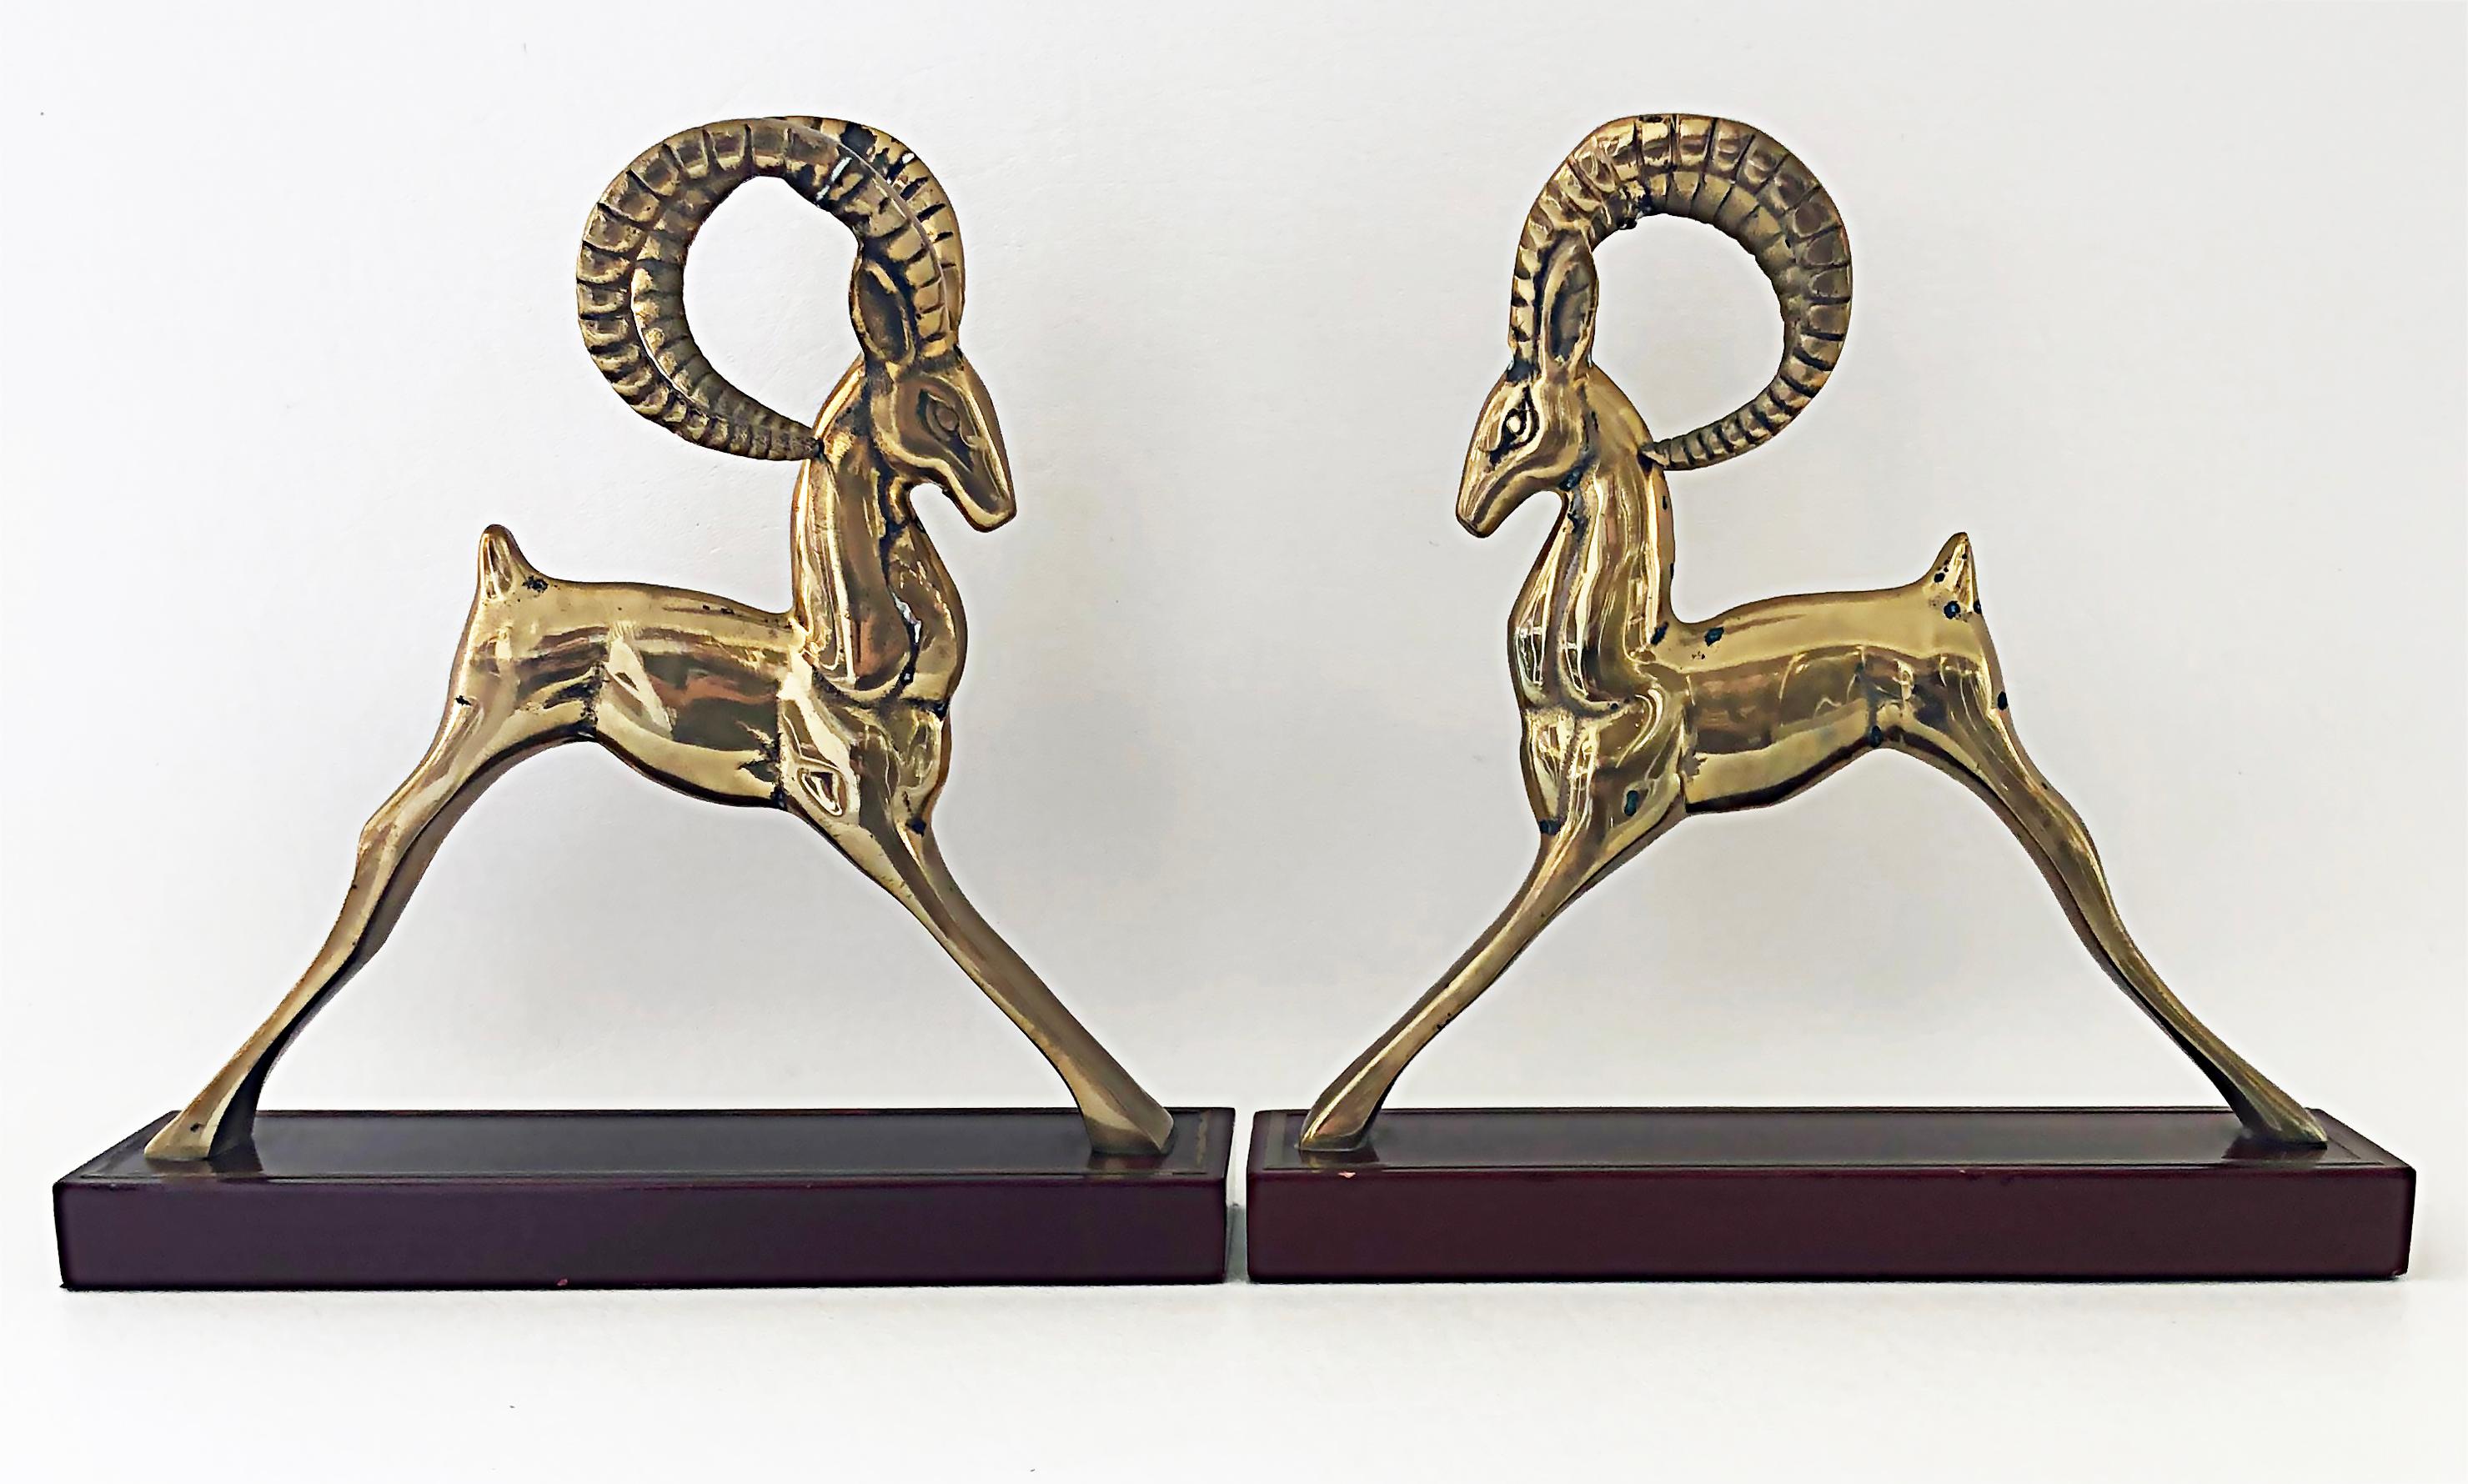 Brass Modernist Deco Style Gazelle bookends sculptures, a pair

Offered for sale is a pair of brass gazelle art deco or modernist style bookends or garniture sculptures. They are mounted on black wood bases with felt beneath. They will look great